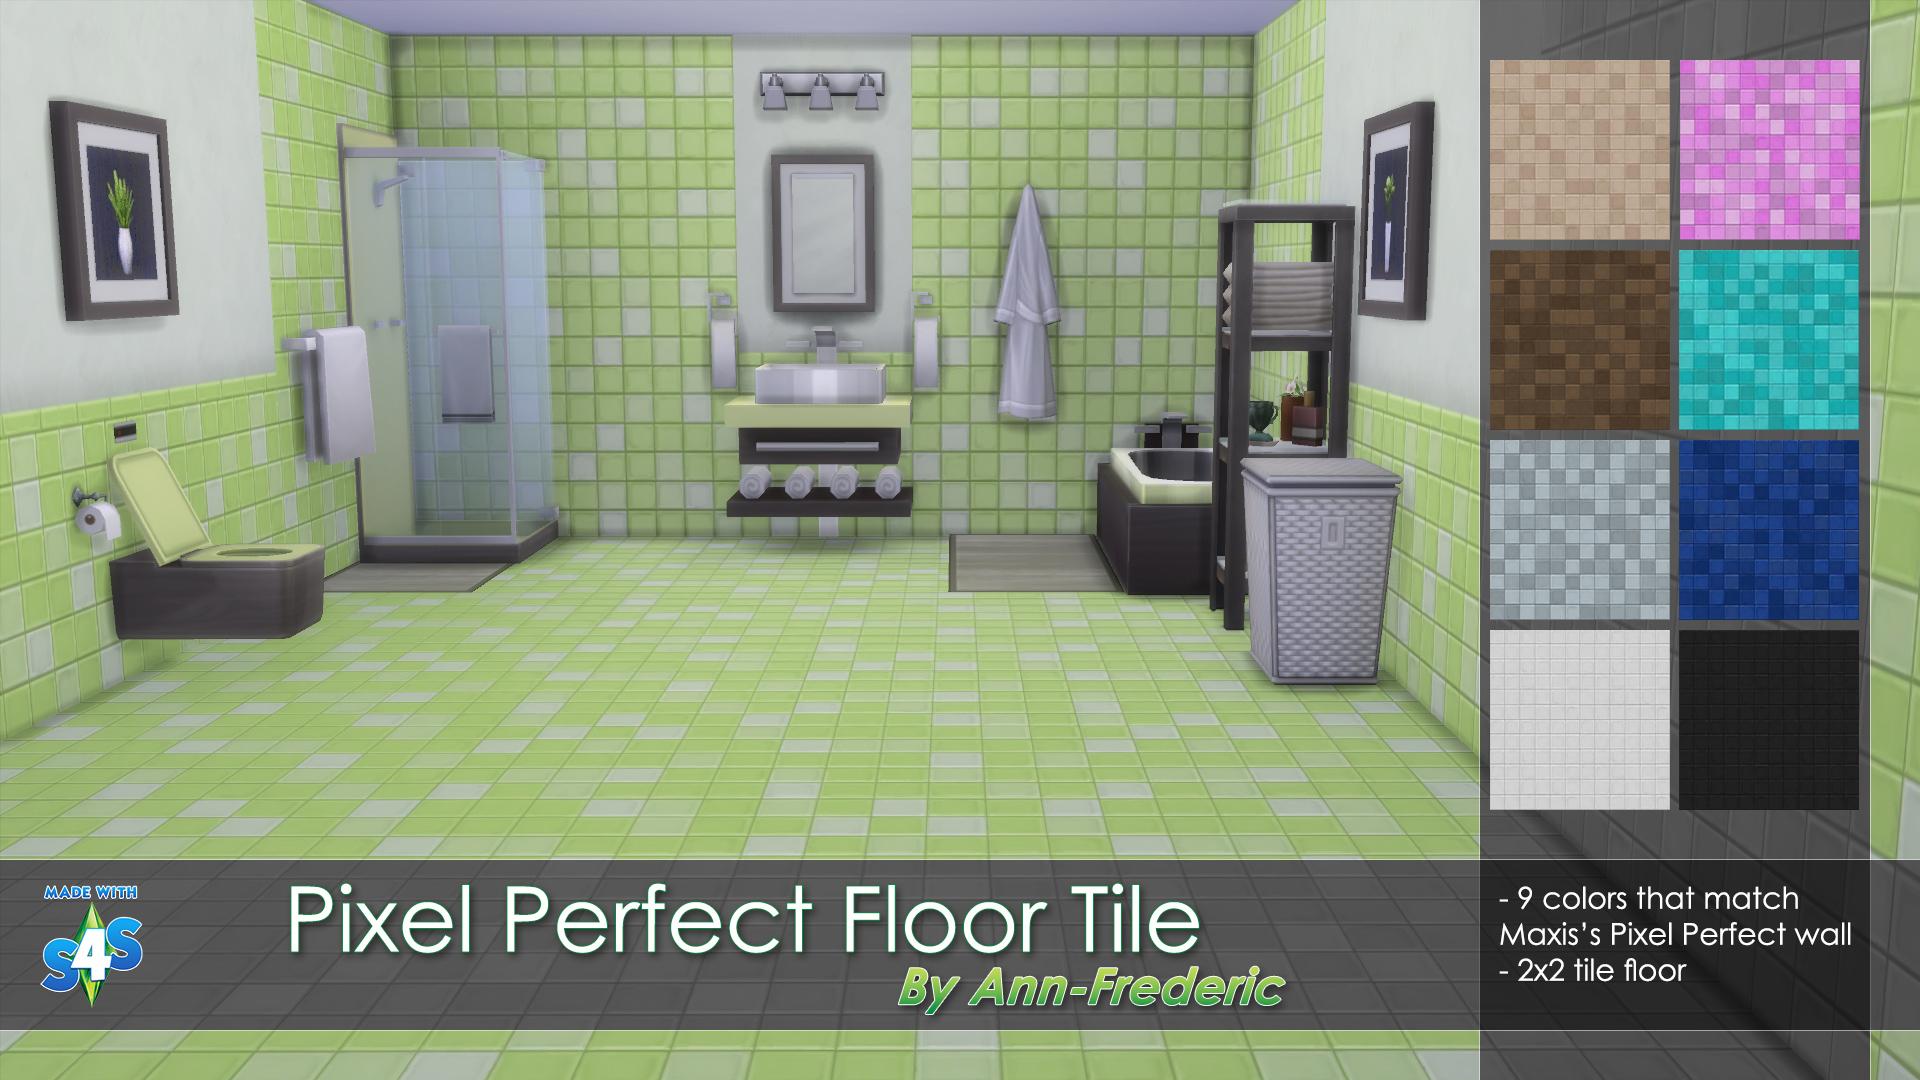 Pixel Perfect Floor Tile, match Maxis's wall